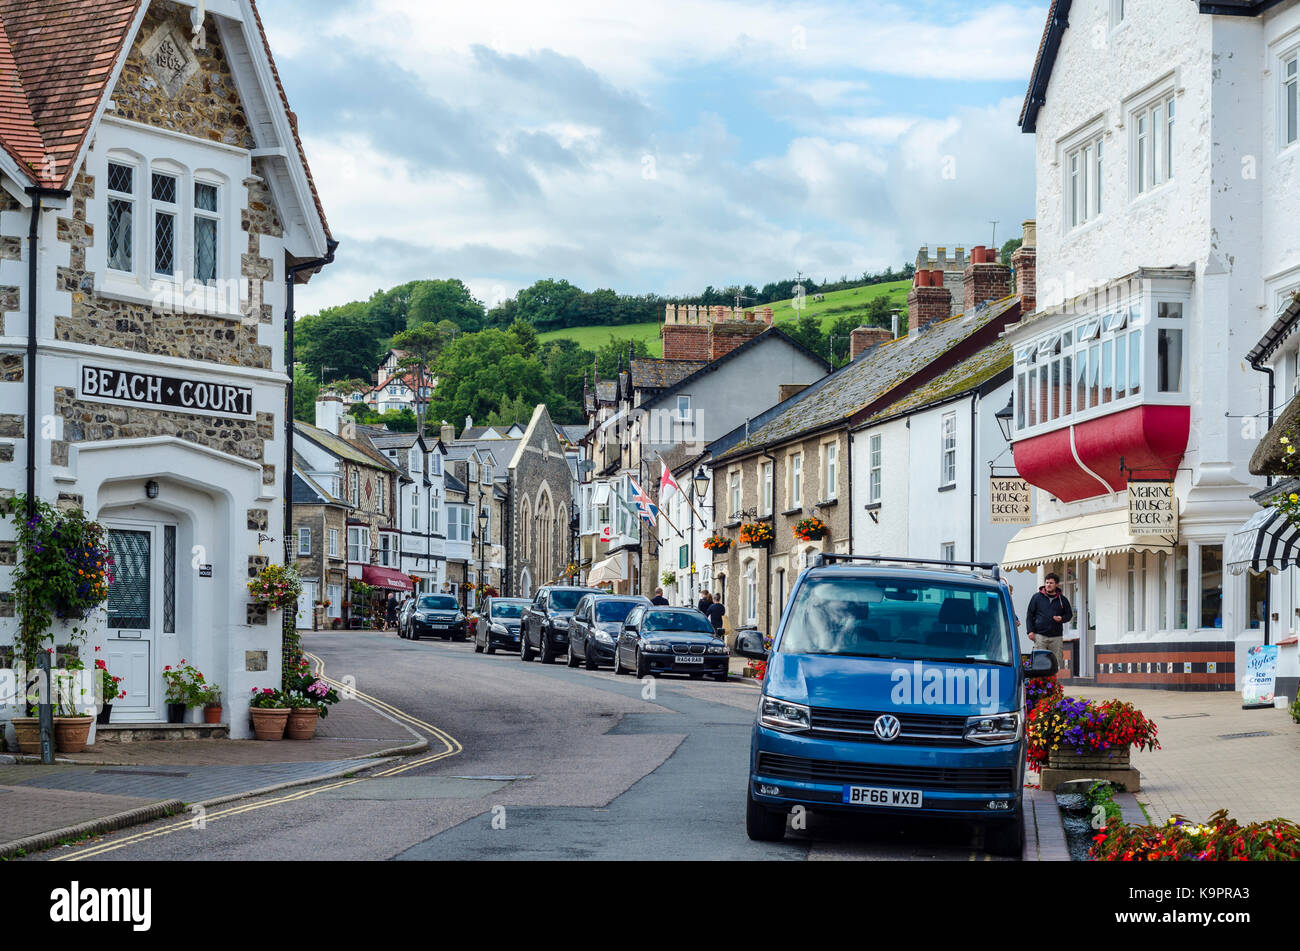 View of houses and shops along Fore Street, Beer, English Seaside Coastal town, East Devon Coast, England, UK Stock Photo